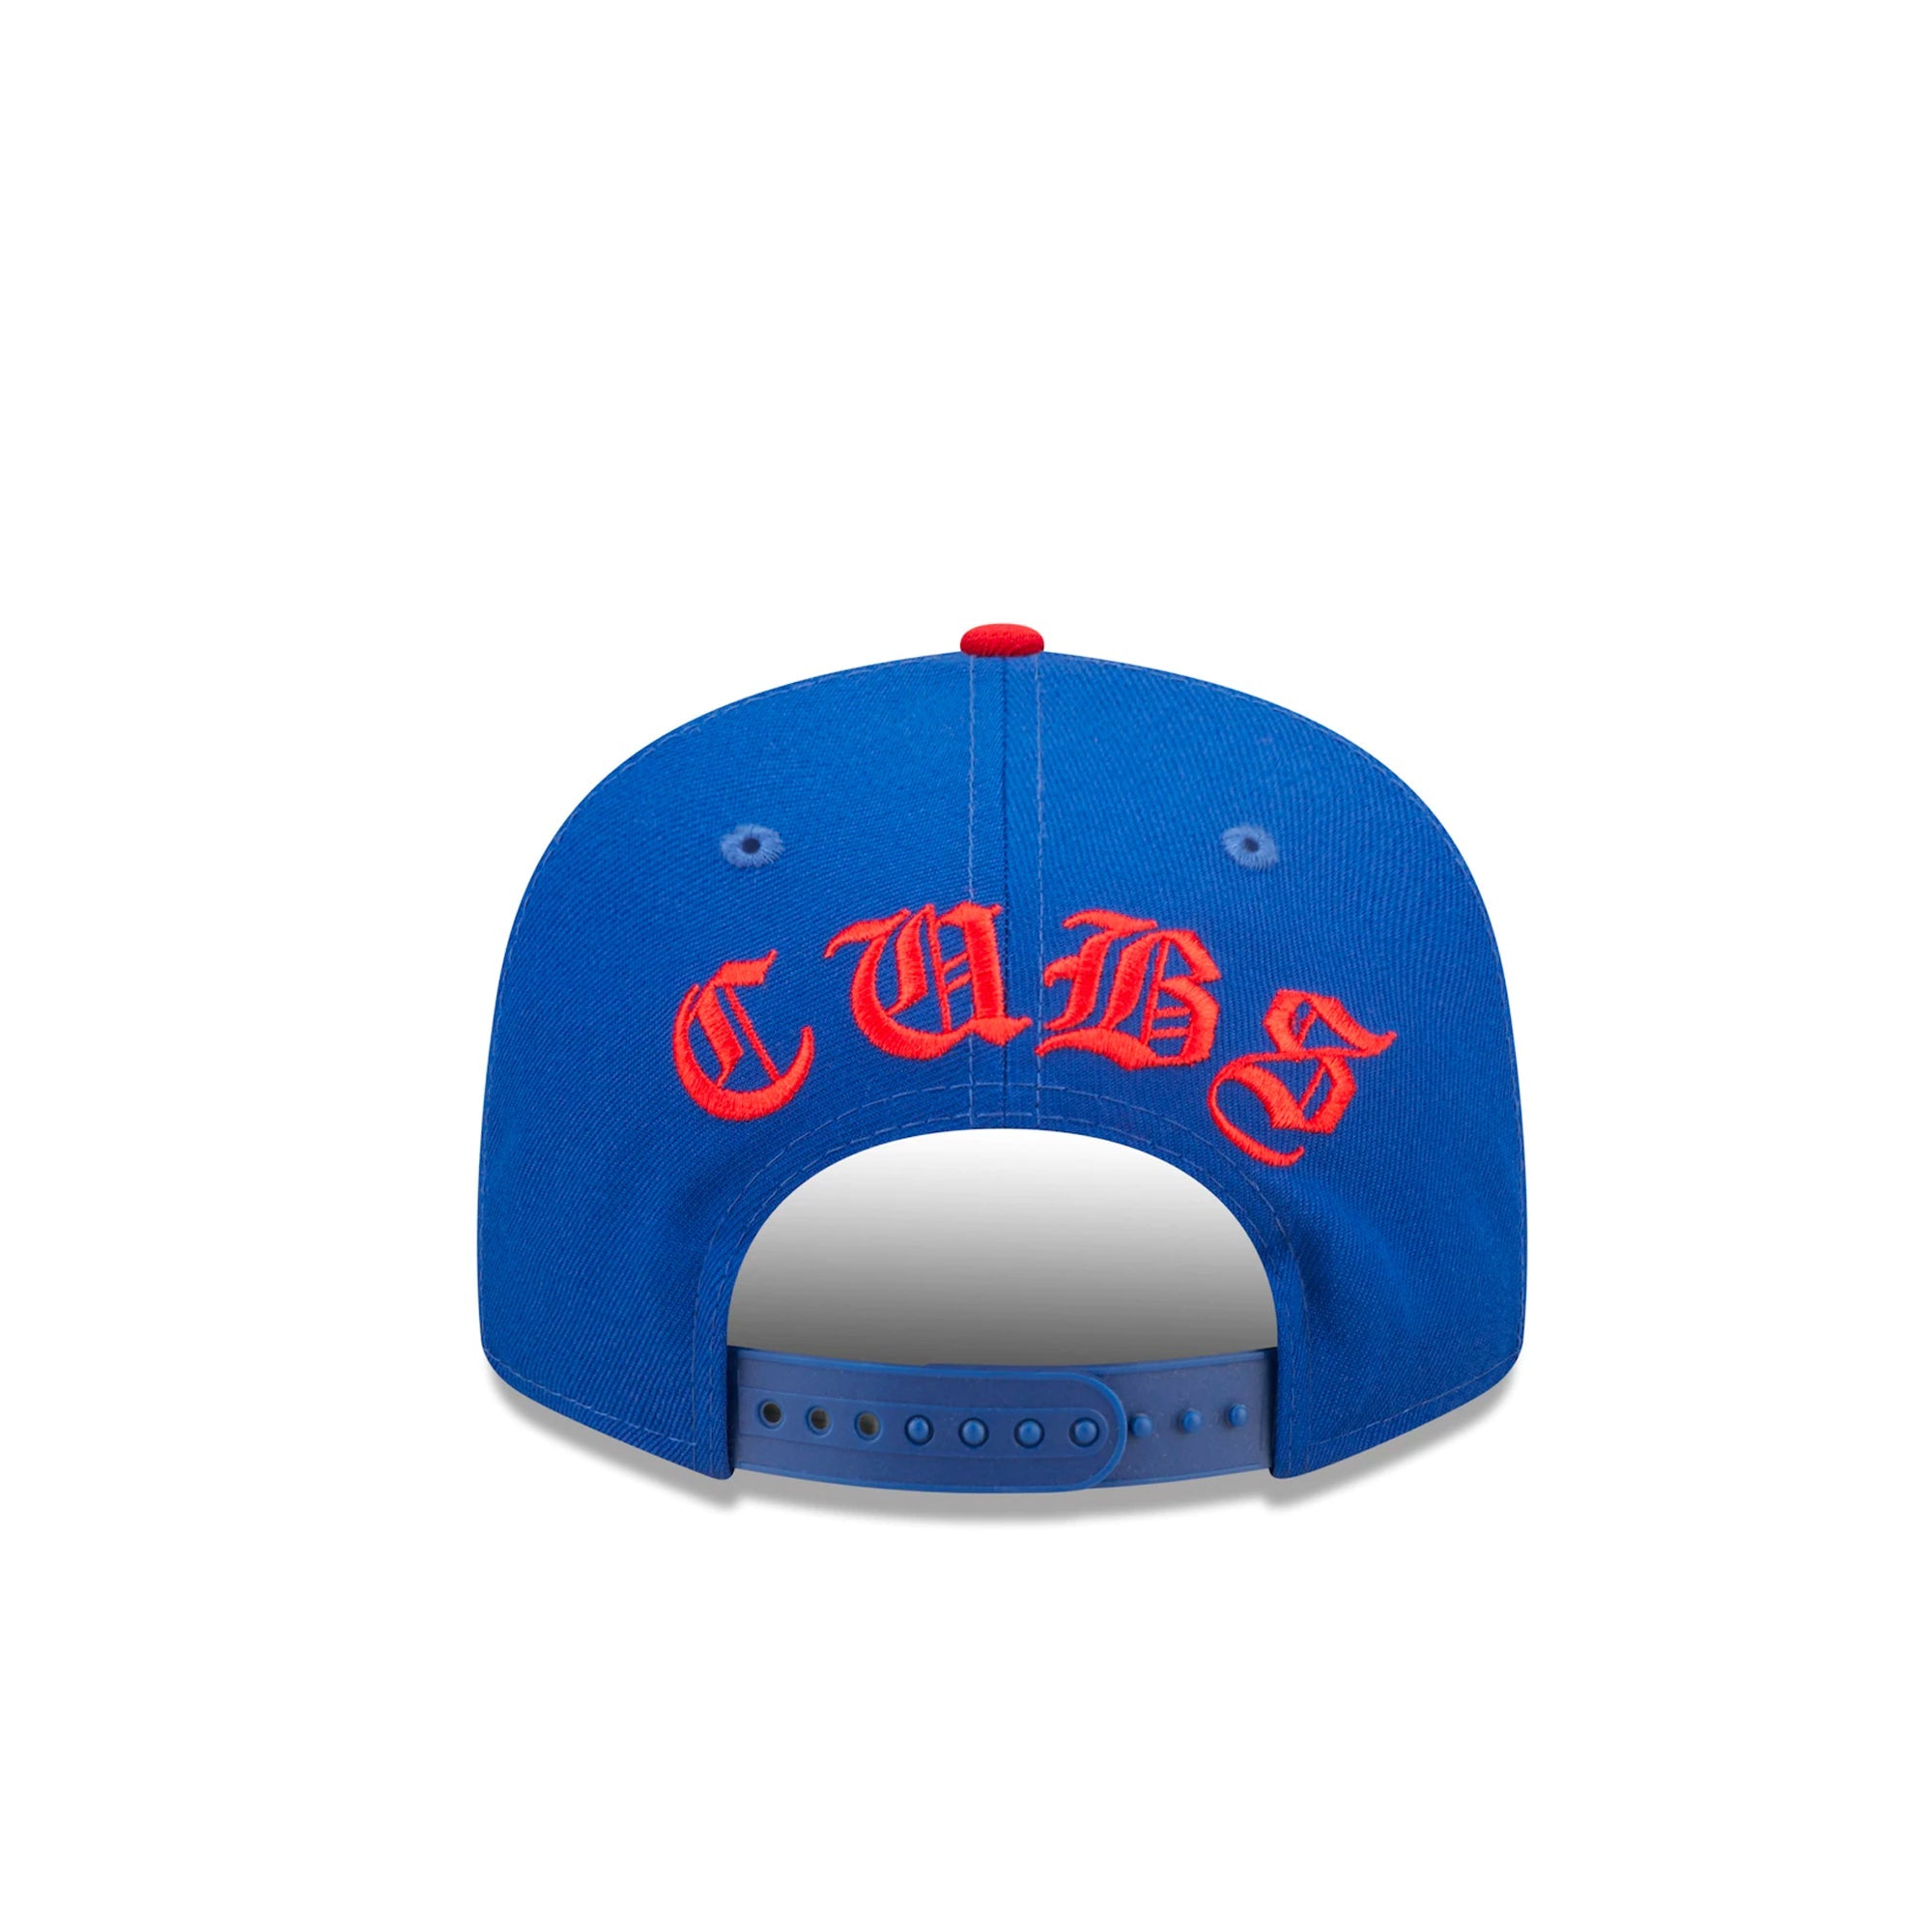 New Era Backletter Arch 9FIFTY Chicago Cubs Snapback Hat